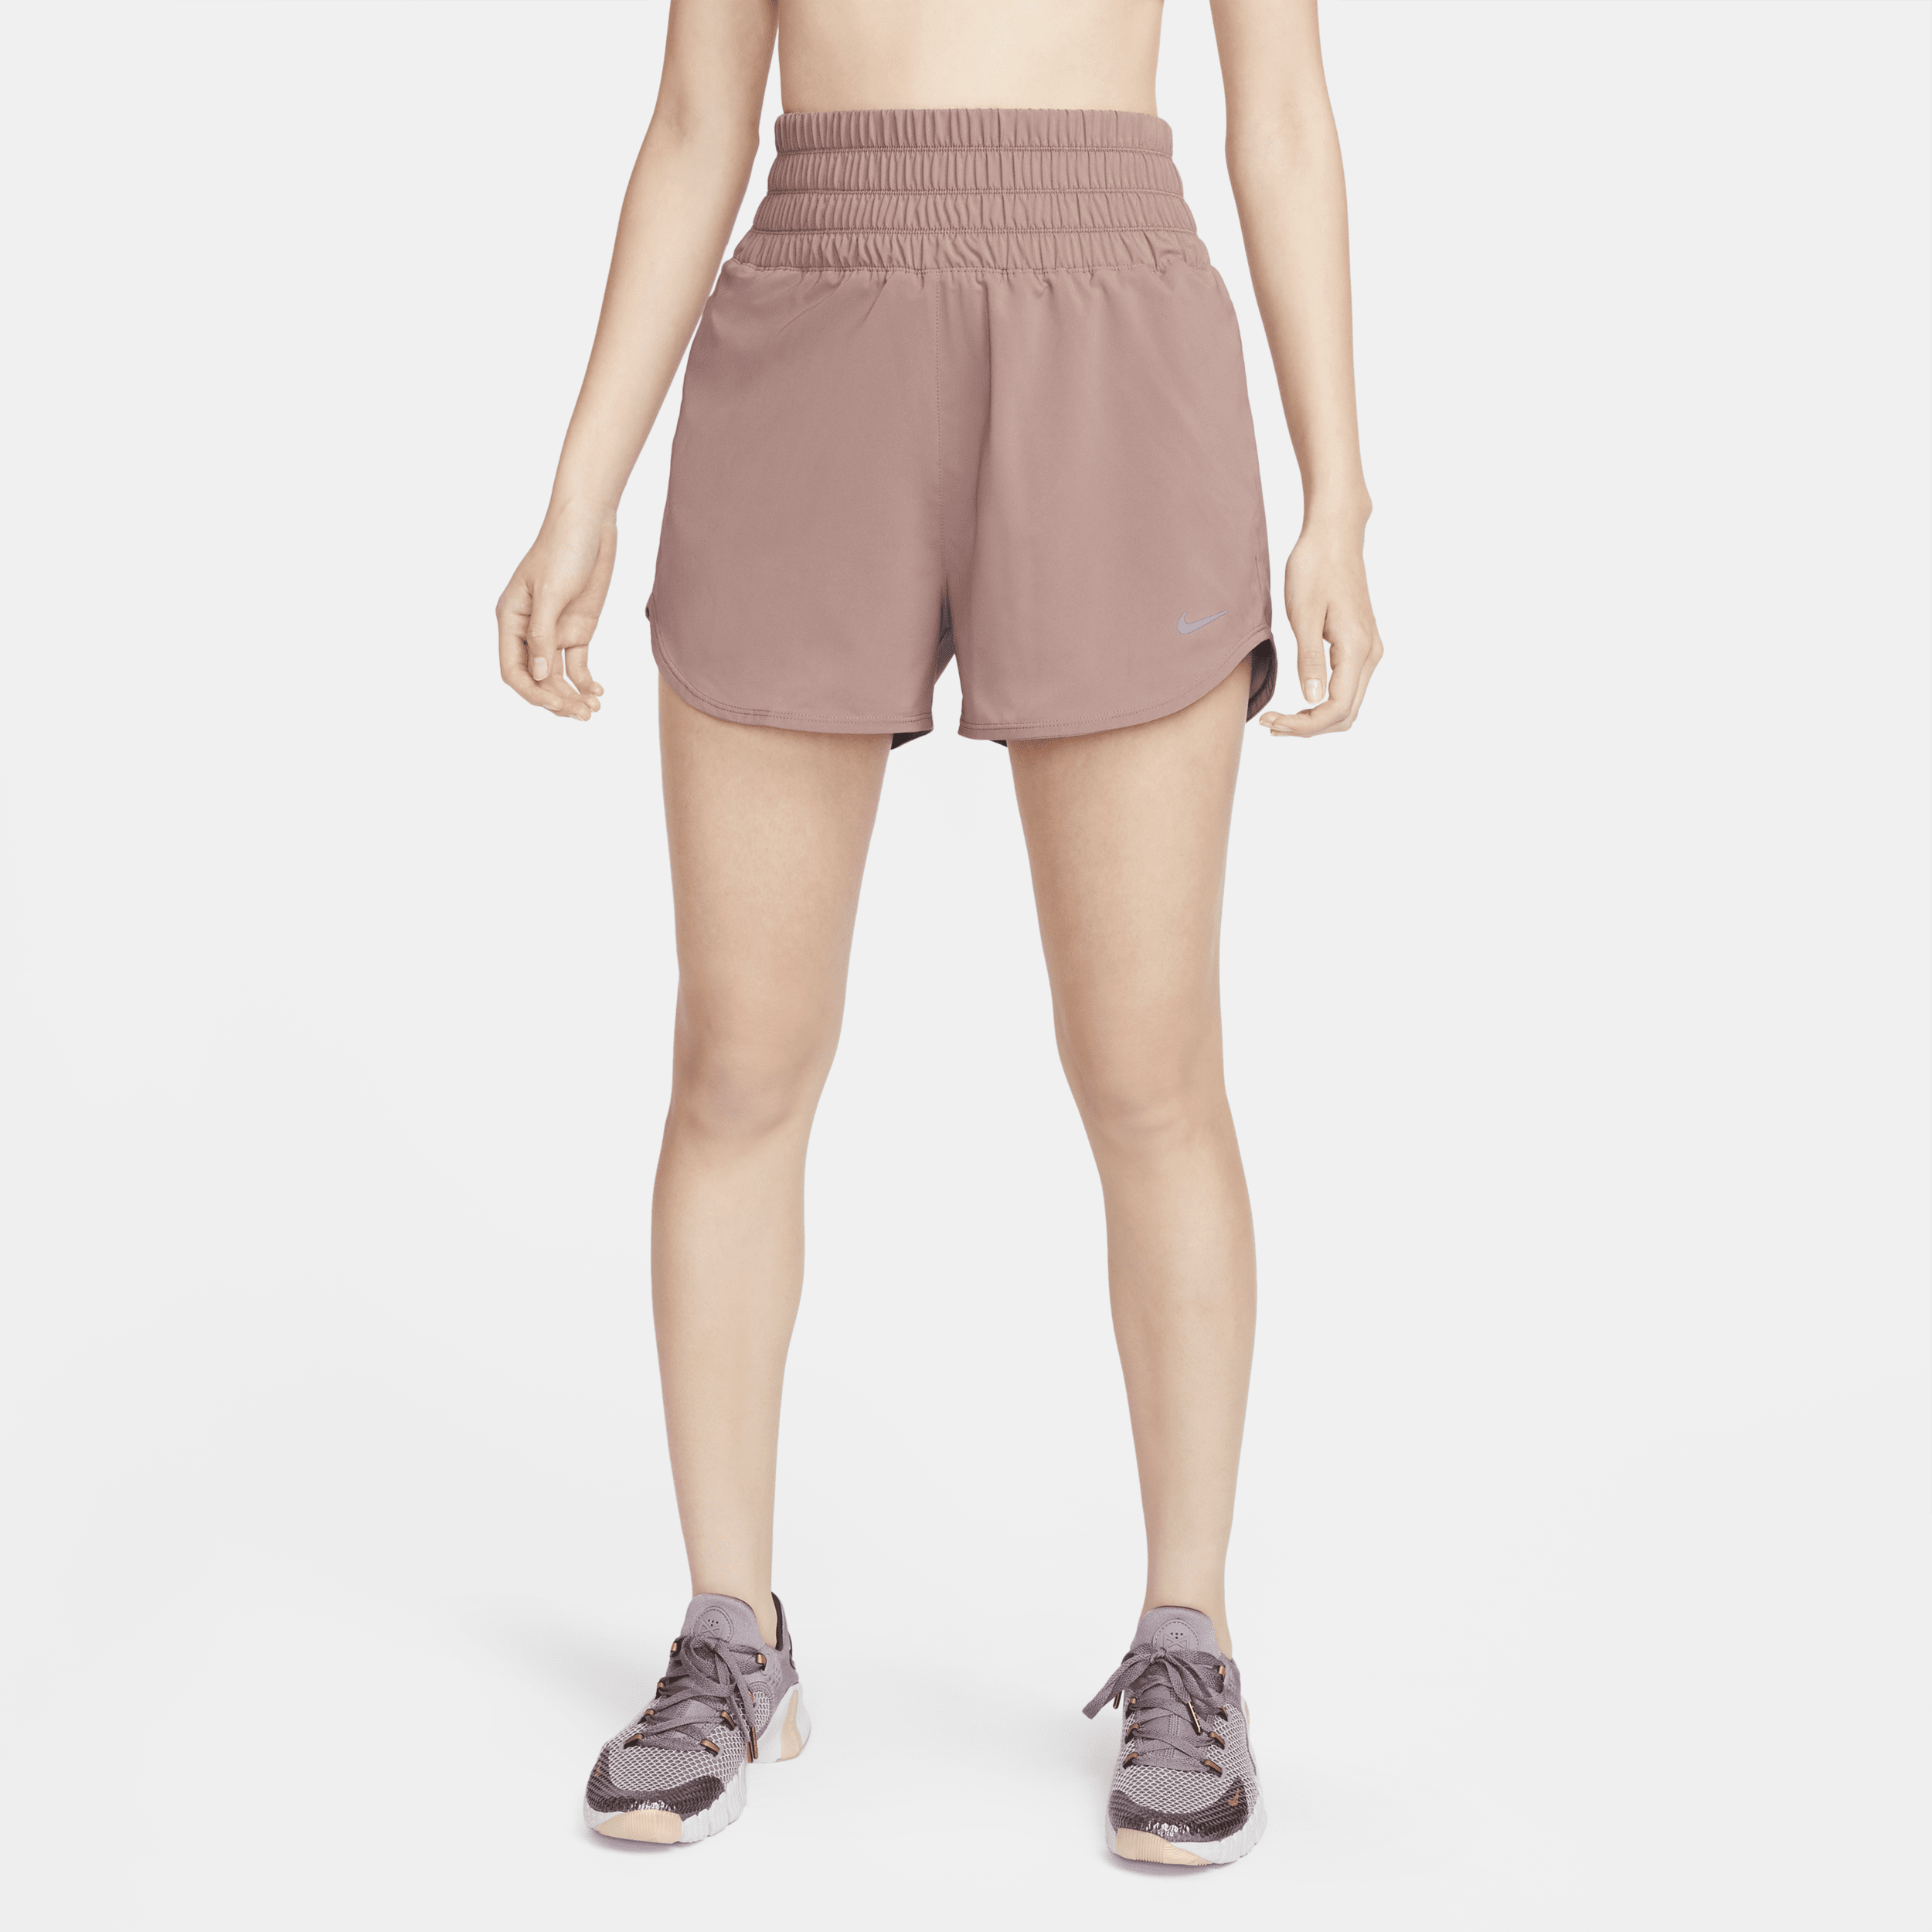 Nike One Women's Dri-FIT Ultra High-Waisted 8cm (approx.) Brief-Lined Shorts.  Nike IE